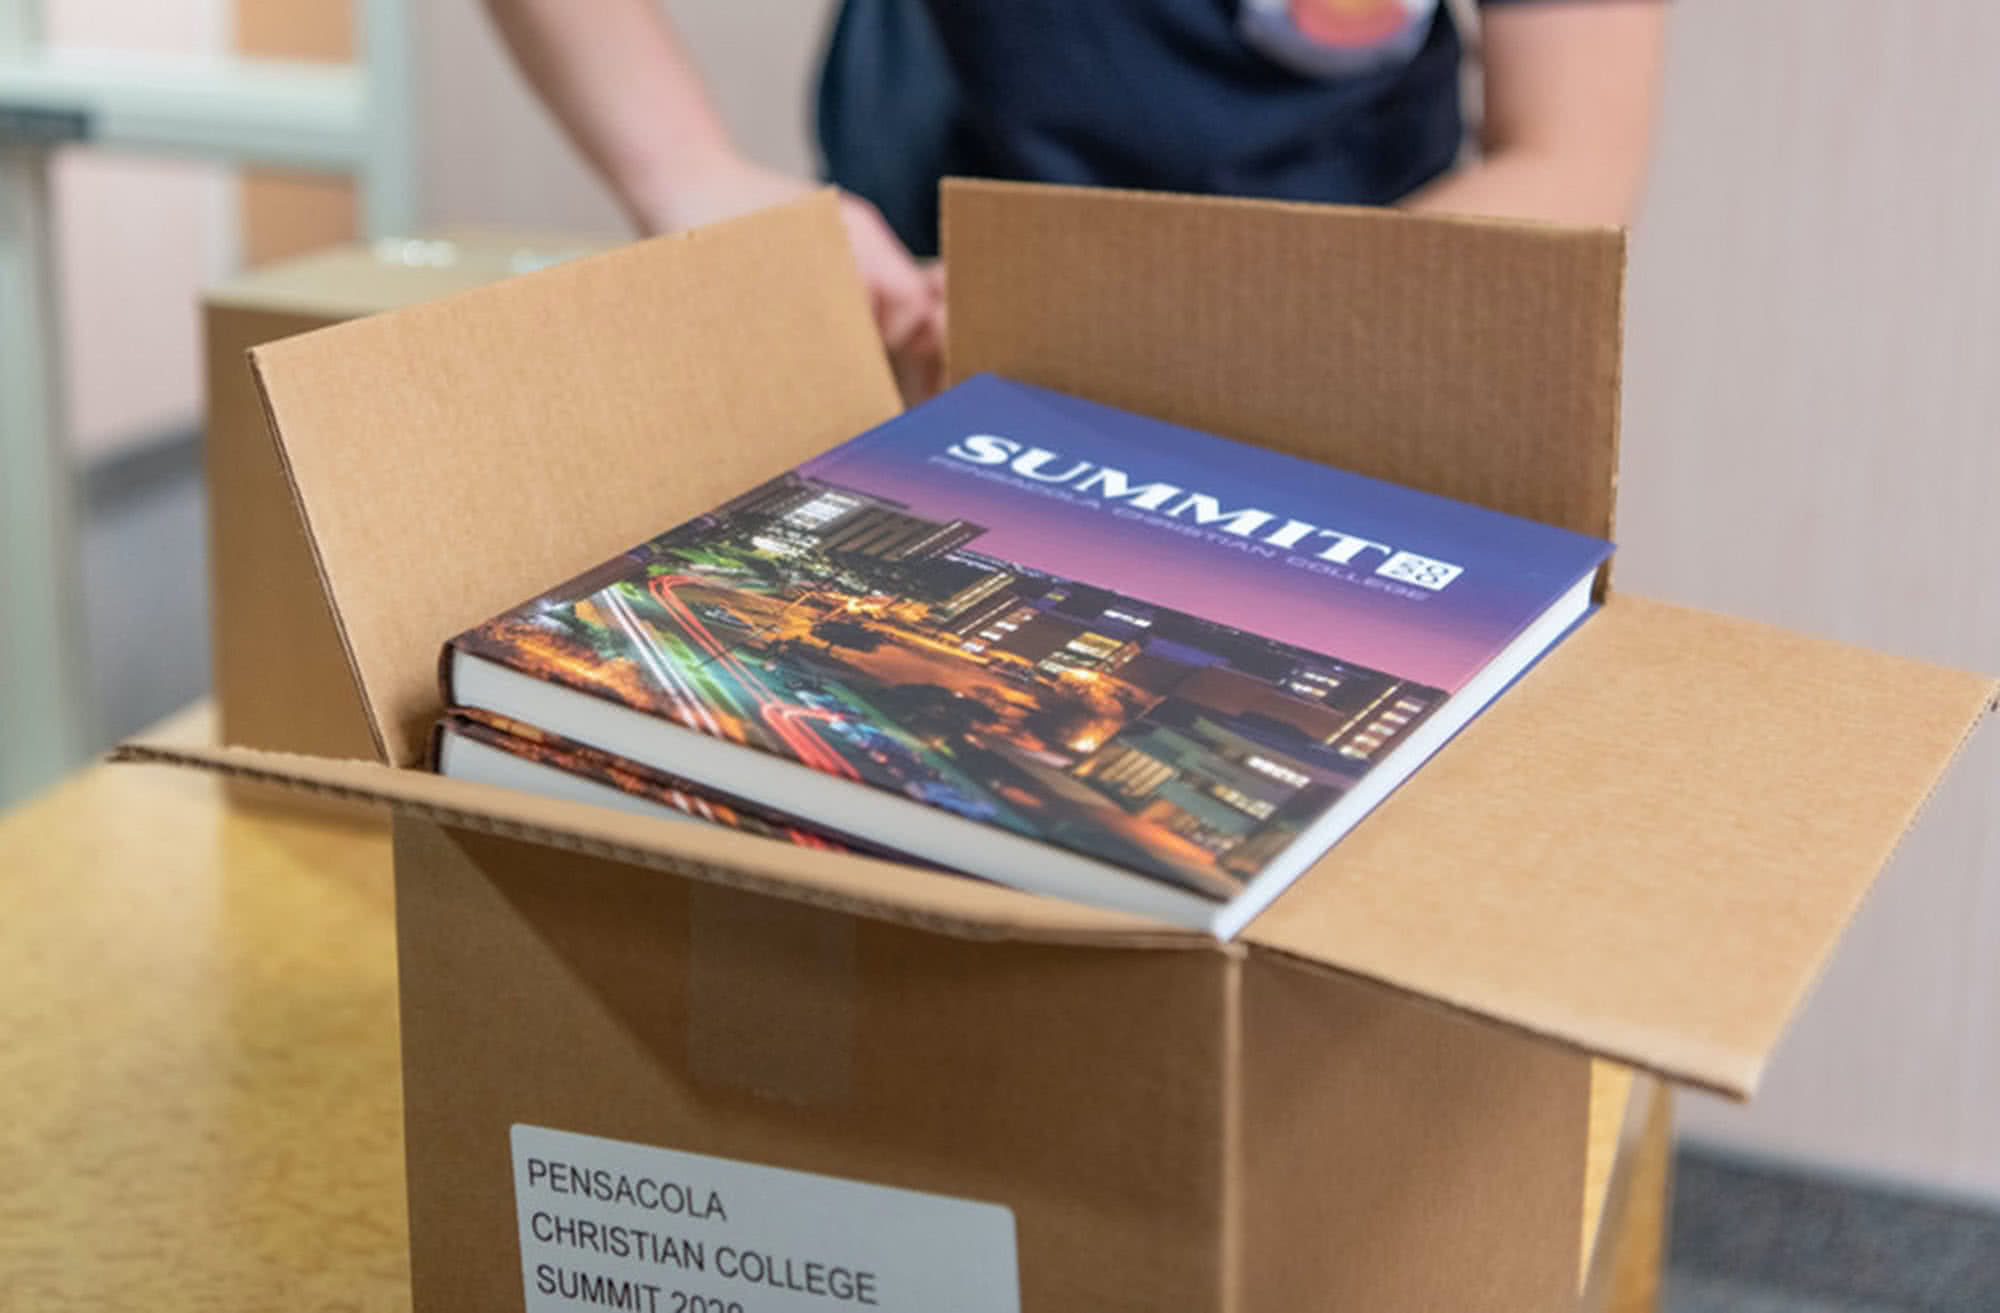 Summit Yearbooks stacked in a cardboard box.